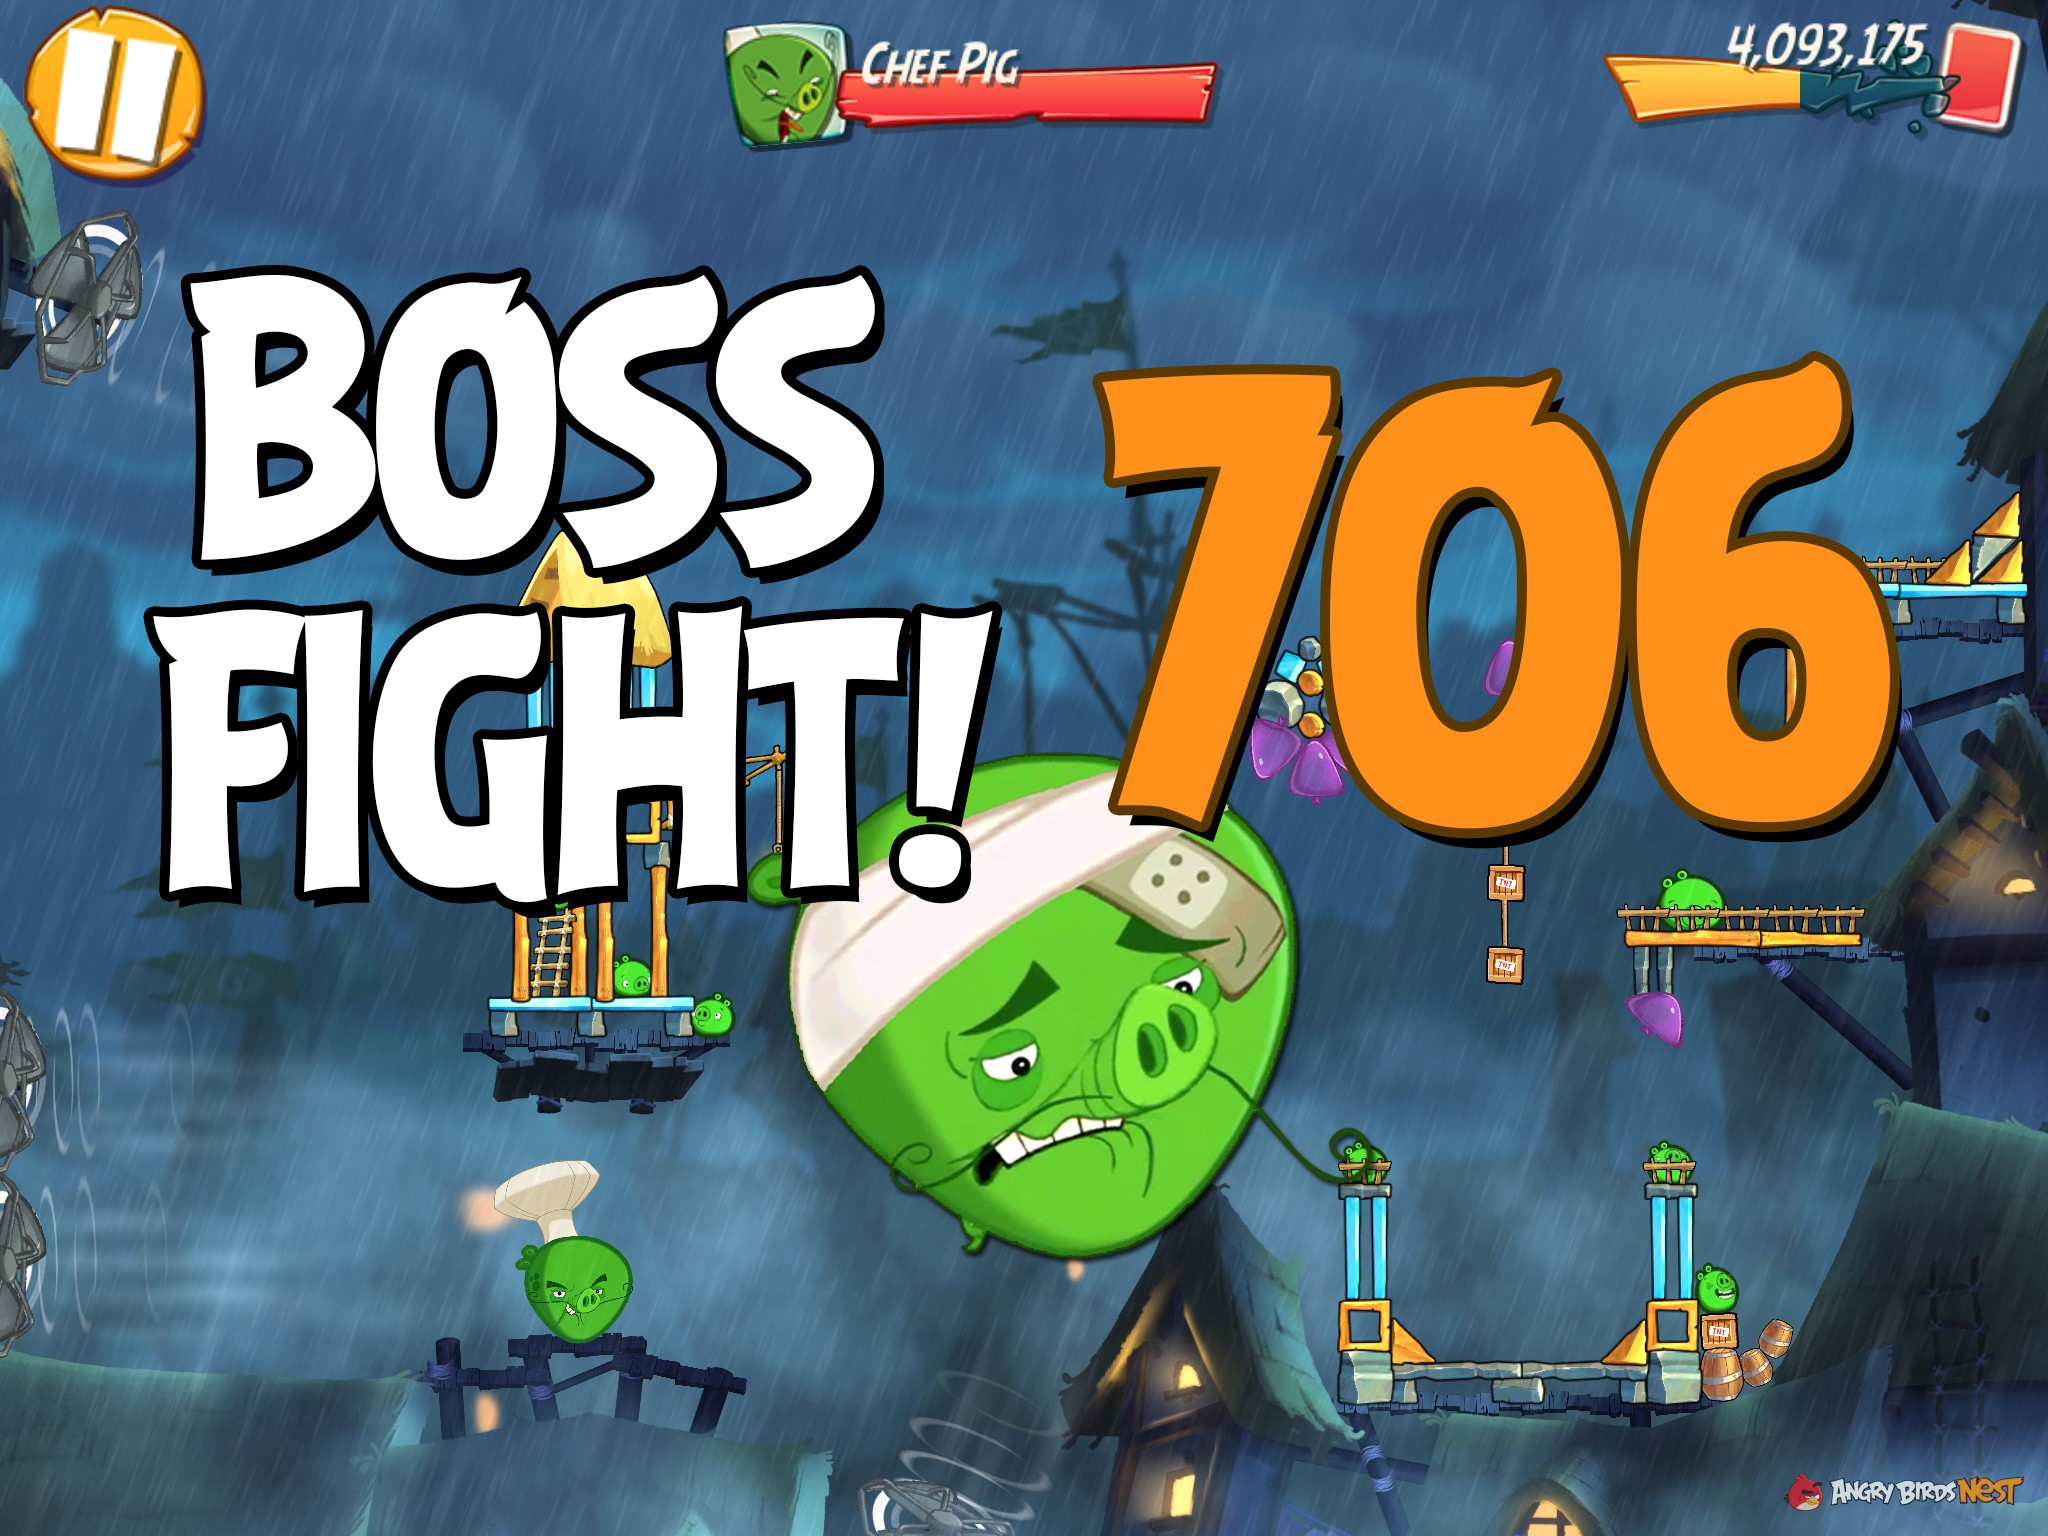 Angry Birds 2 Boss Fight Level 706